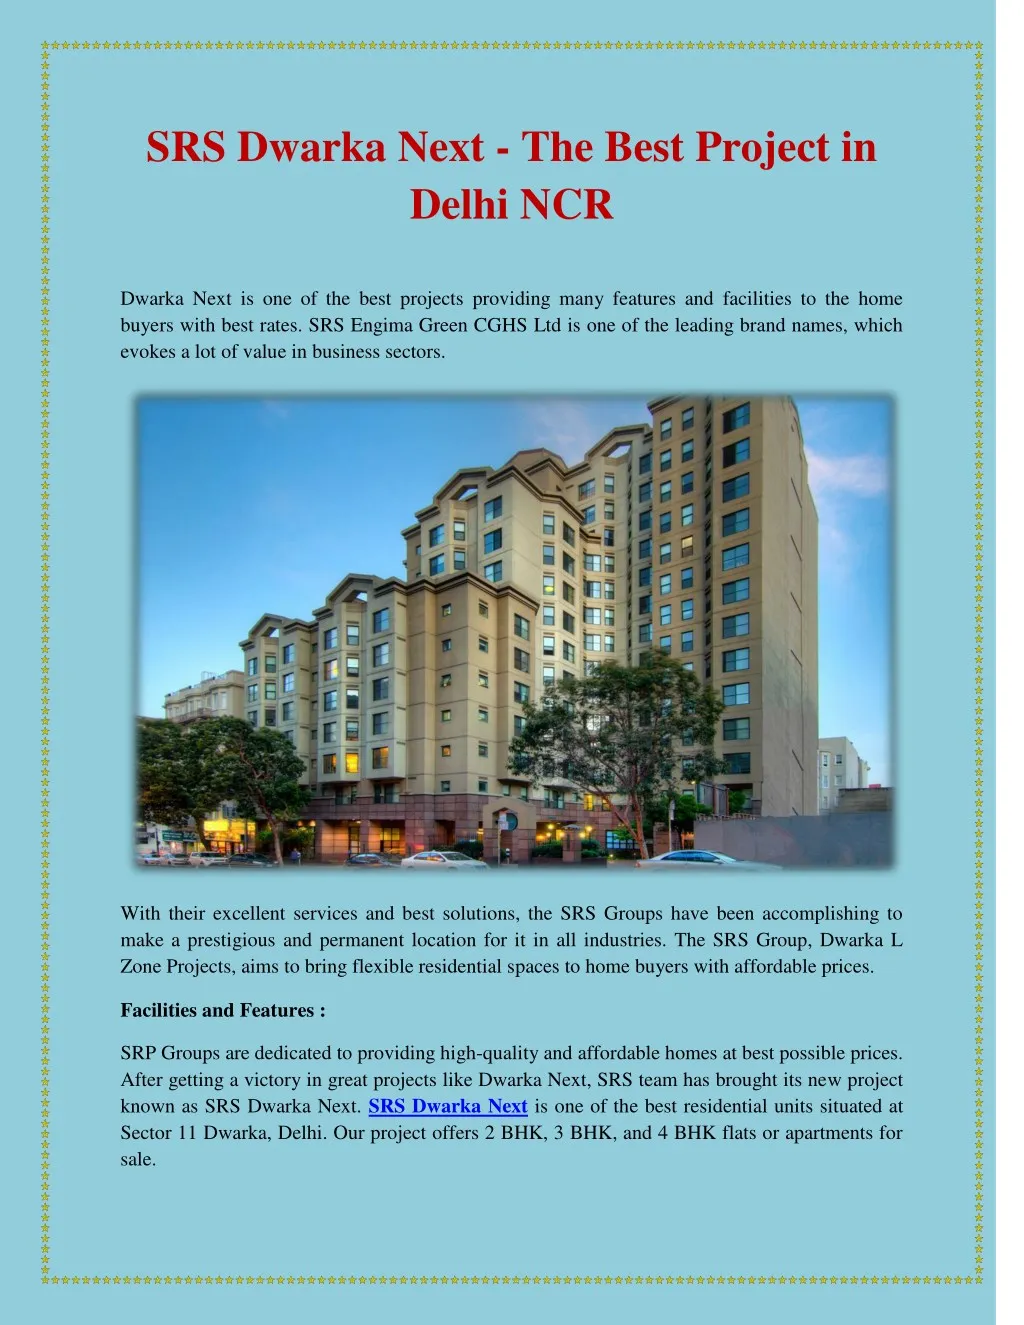 srs dwarka next the best project in delhi ncr